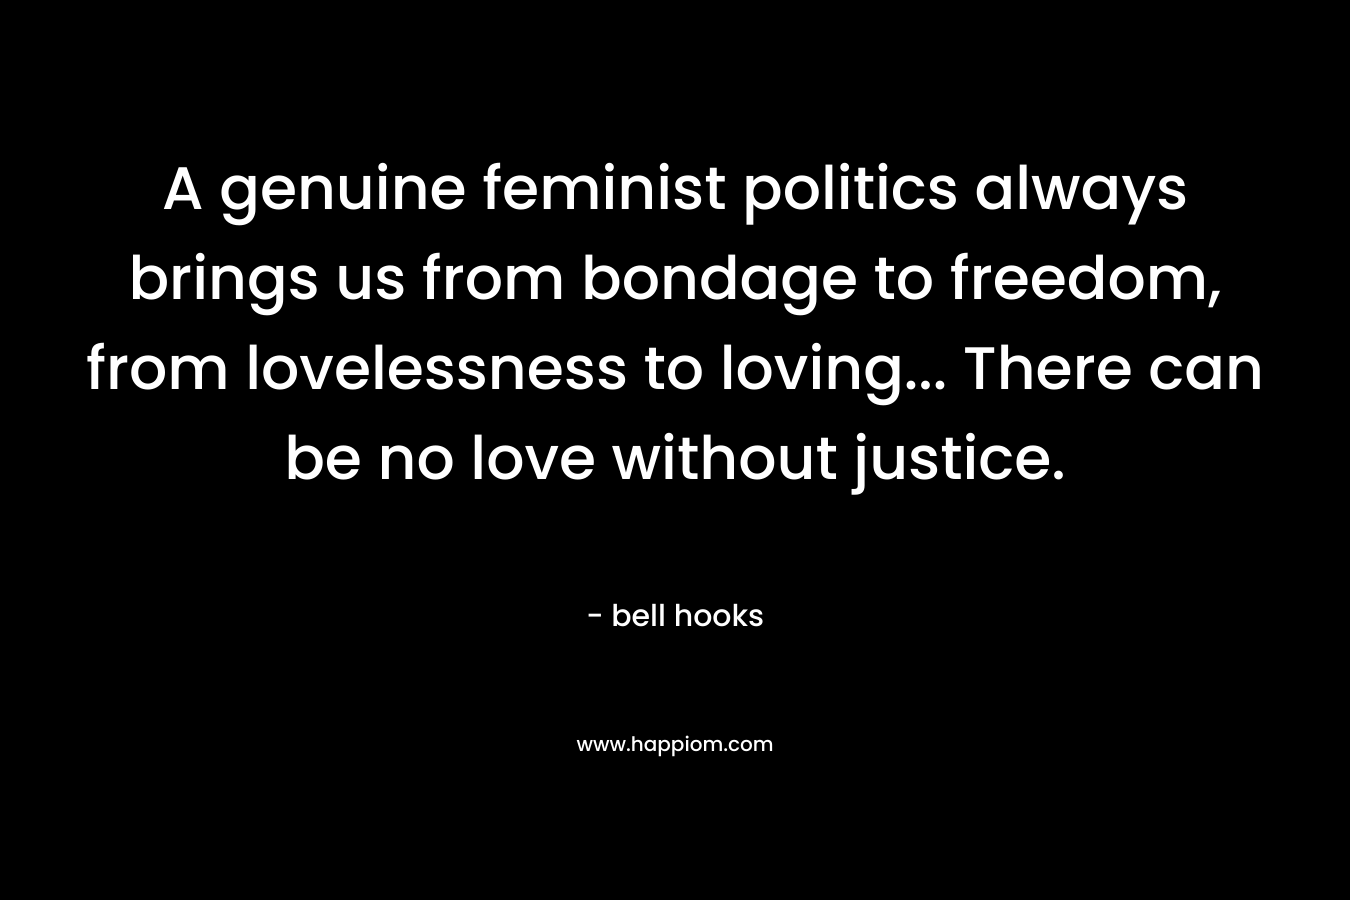 A genuine feminist politics always brings us from bondage to freedom, from lovelessness to loving... There can be no love without justice.